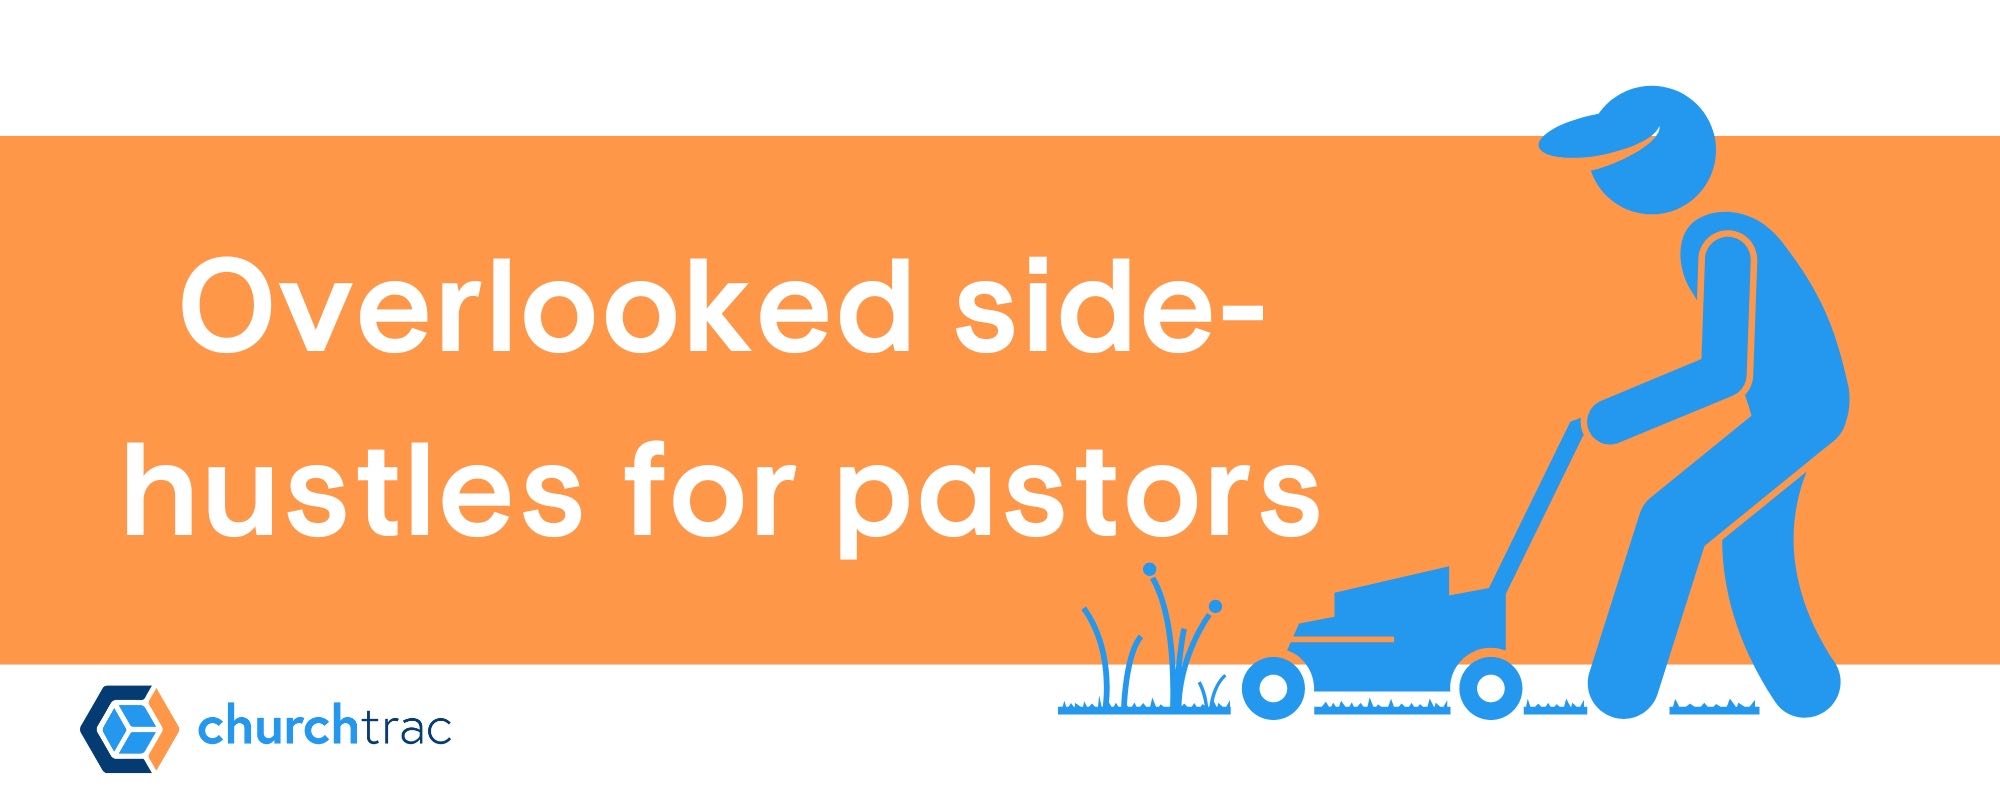 These are overlooked side hustles for pastors and church leaders